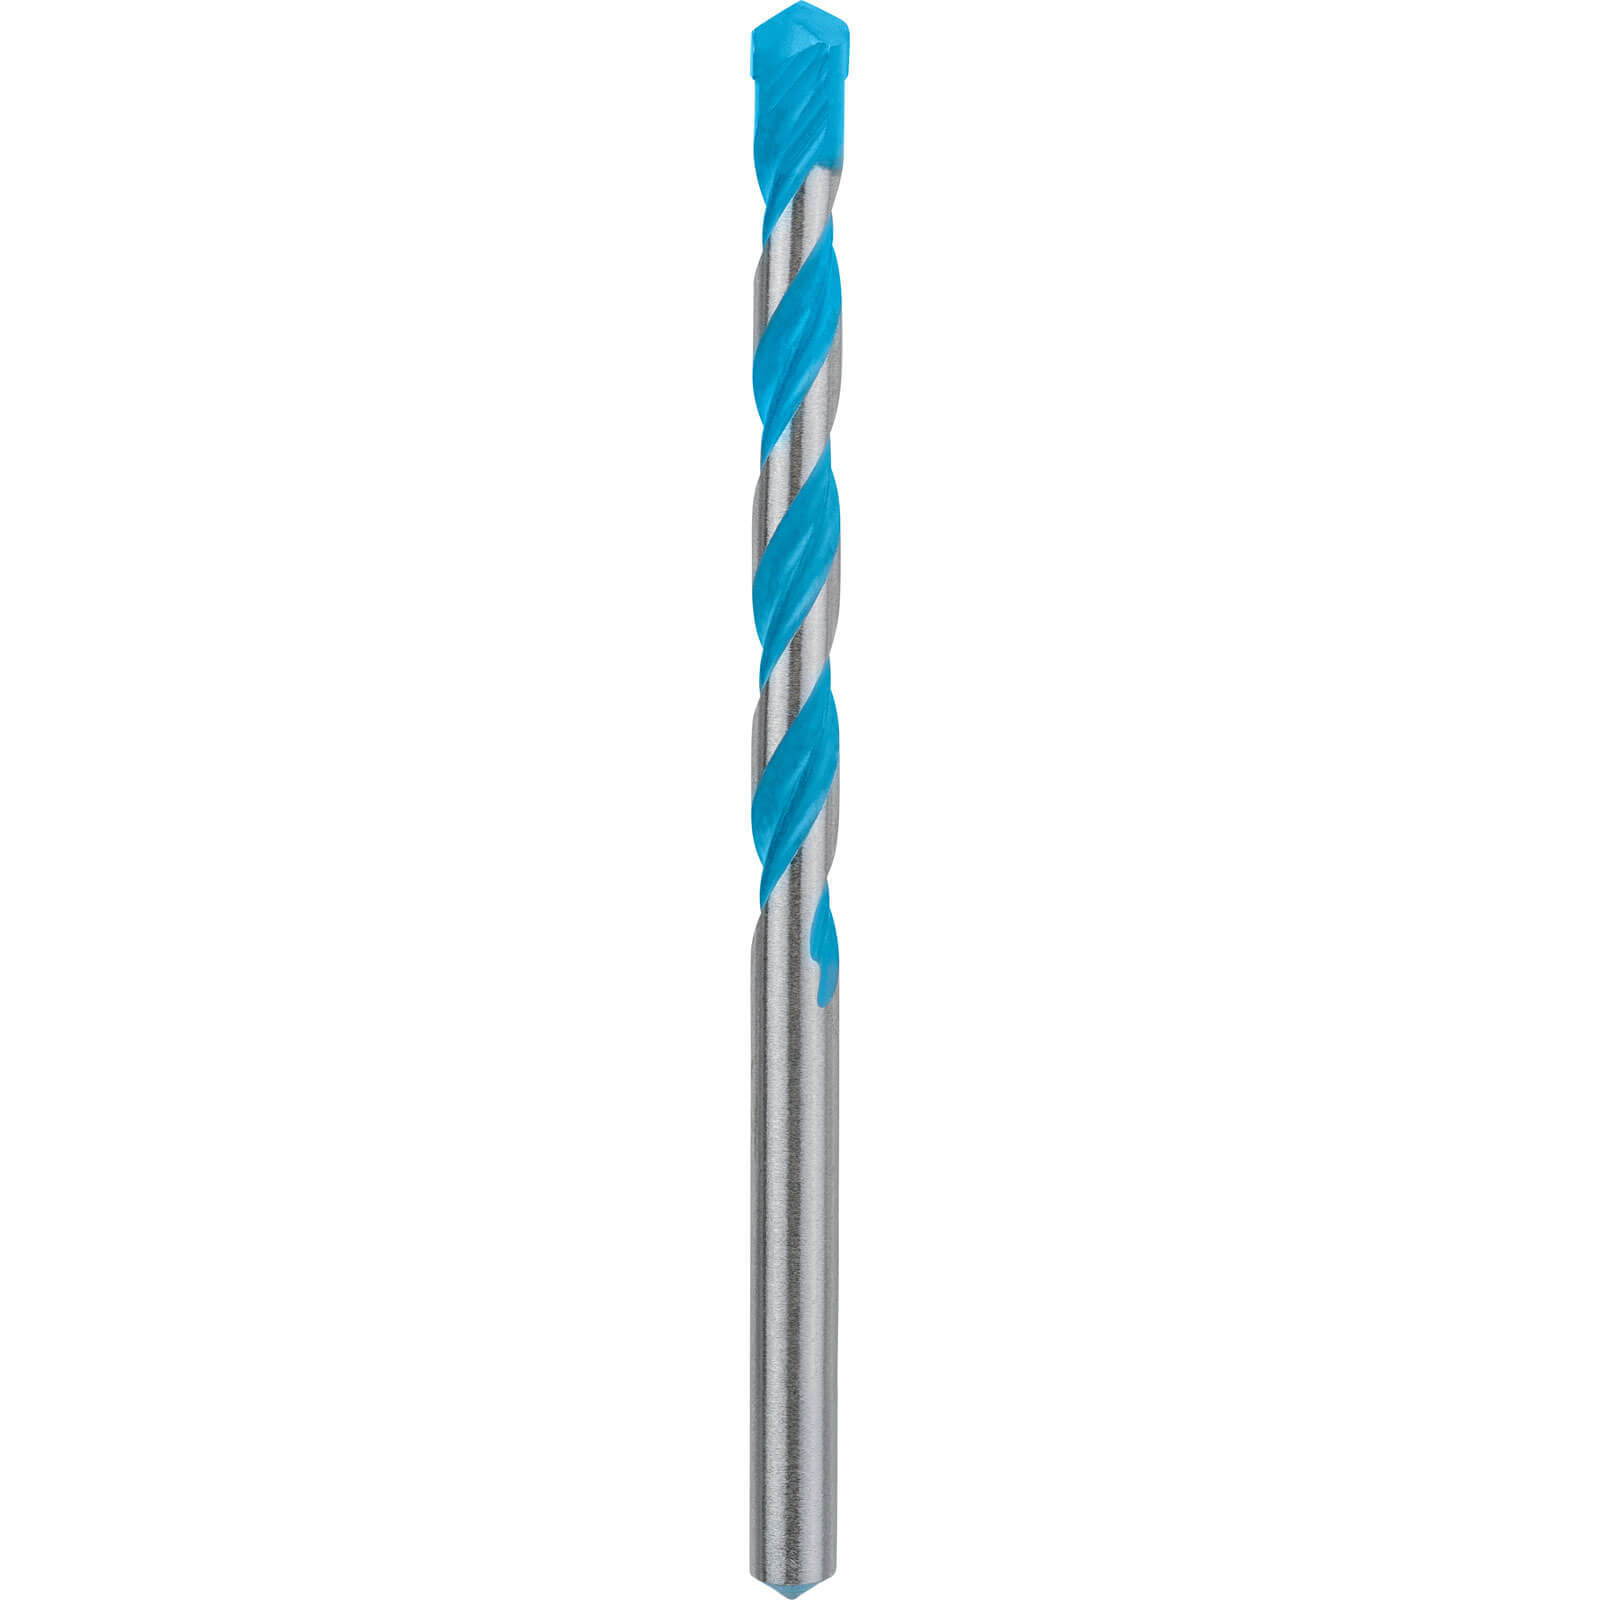 Image of Bosch Expert CYL-9 Multi Construction Drill Bit 6mm 100mm Pack of 1